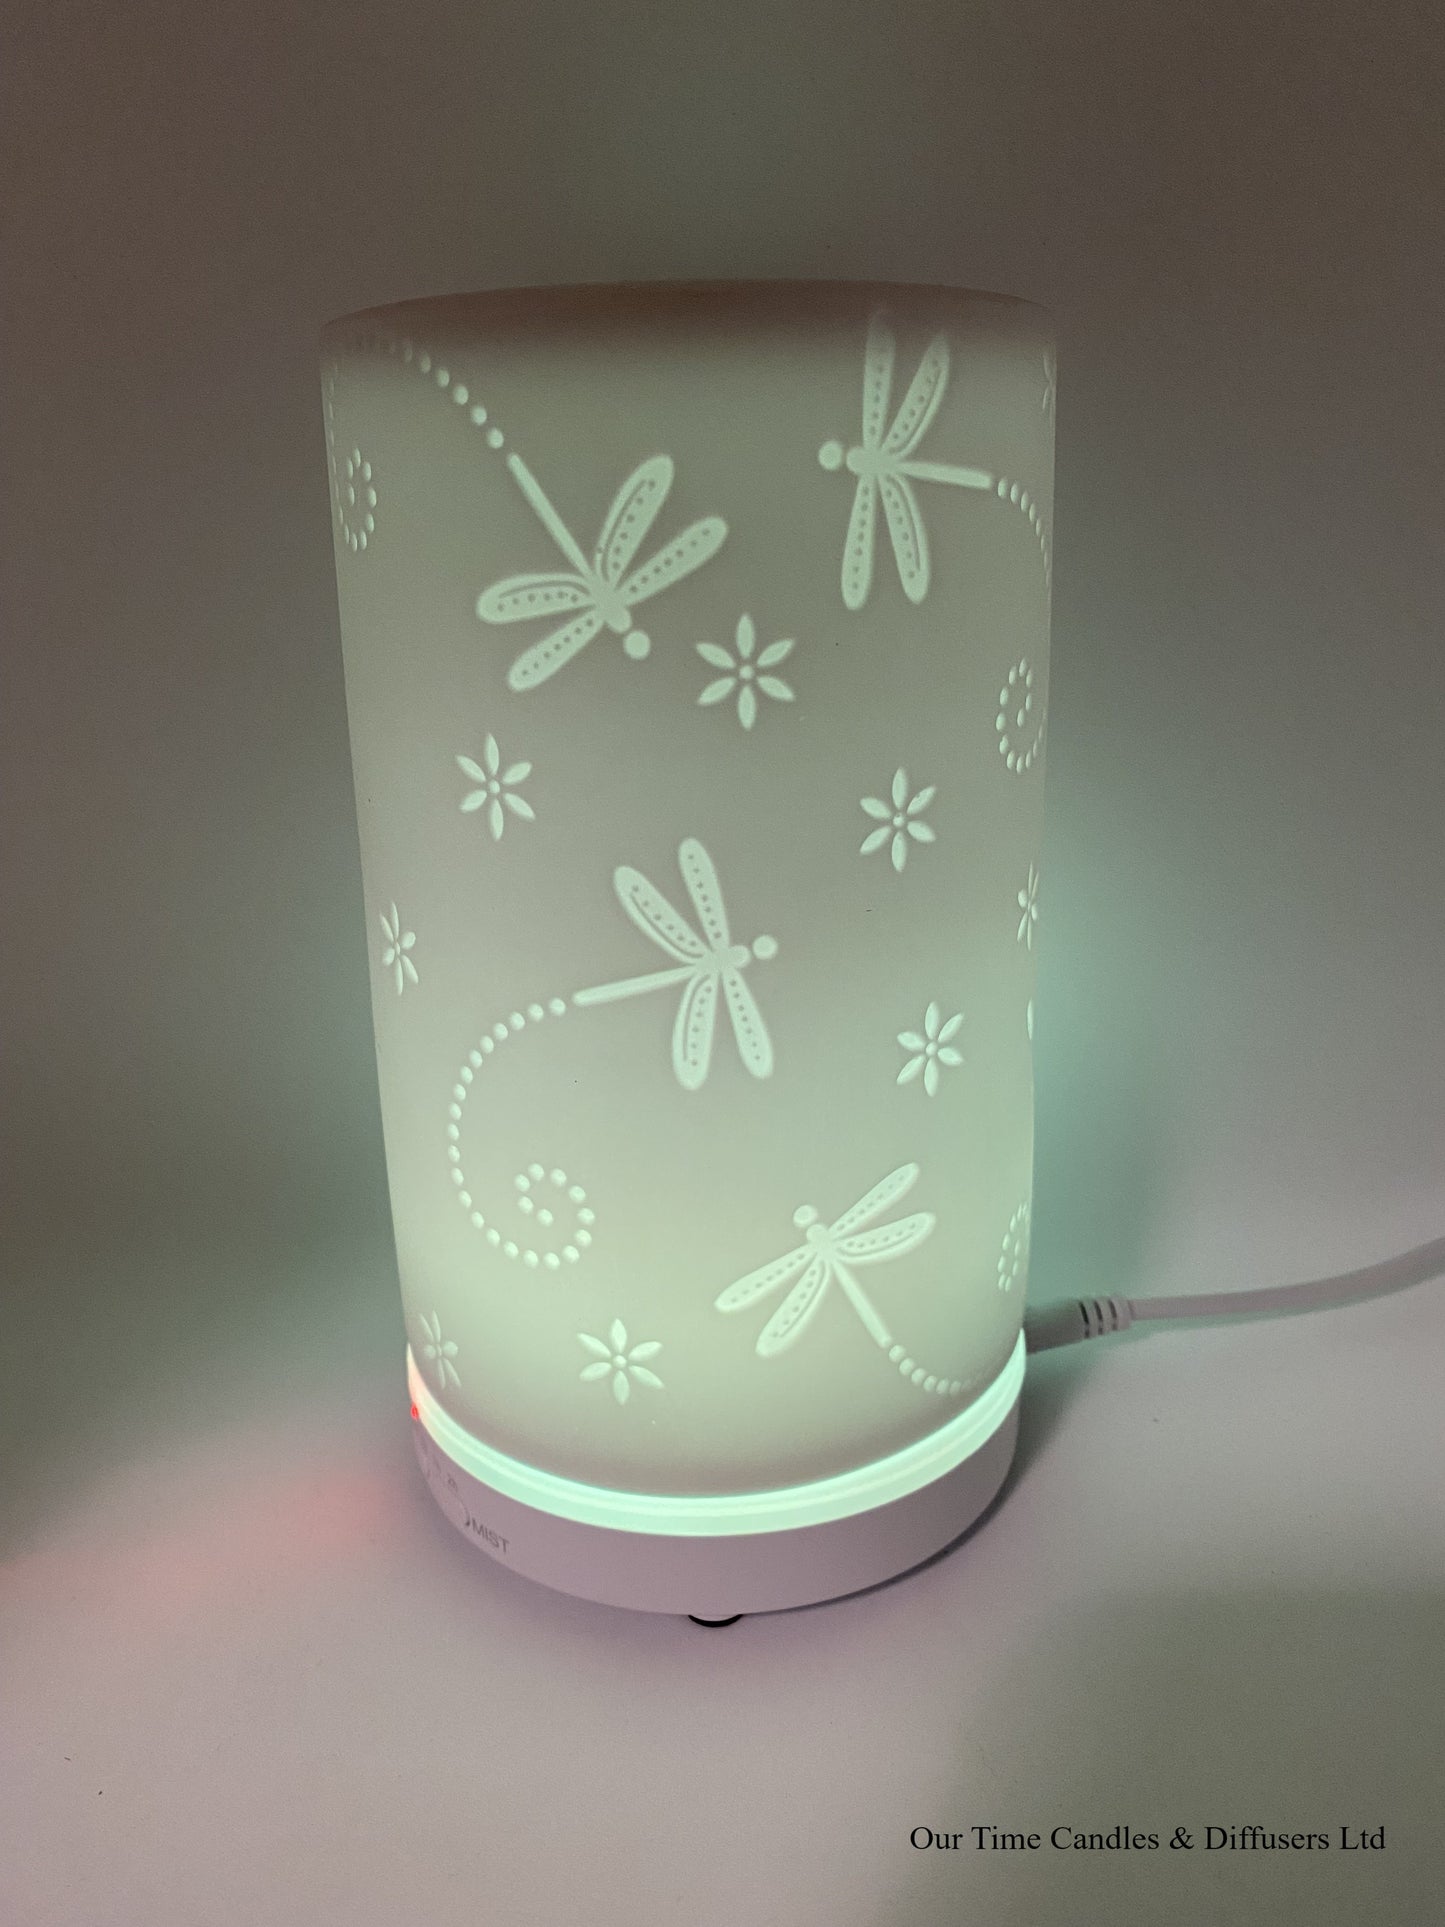 Aroma Diffuser with dragonfly detail